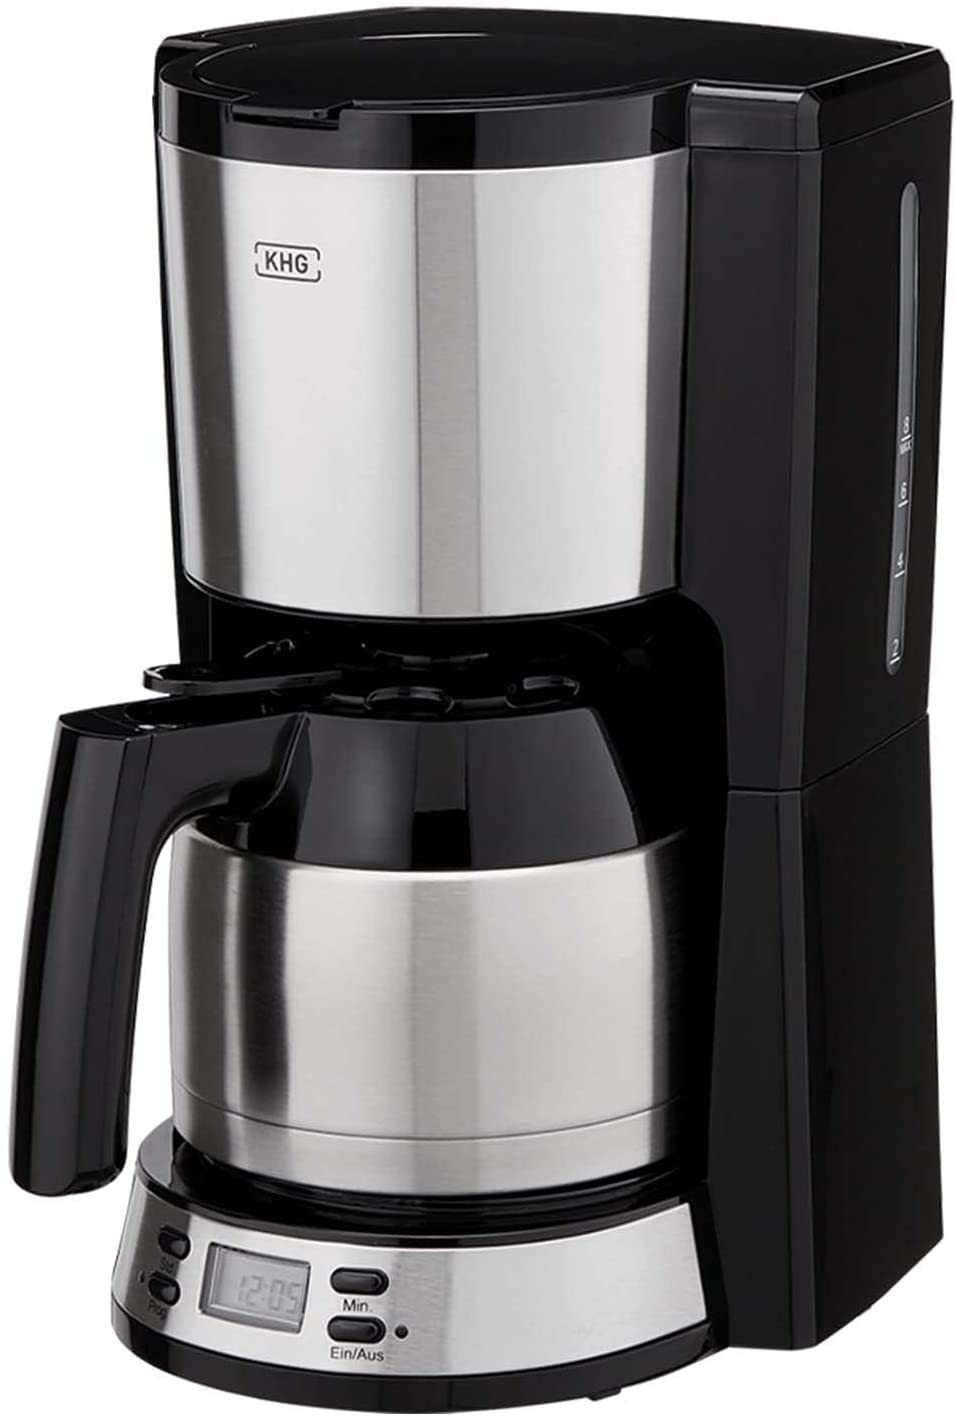 KHG TKA-183SE Plastic / Stainless Steel Coffee Machine in Black/Silver with Stainless Steel Thermal Jug 1 Litre Capacity for 8 Cups Permanent Filter Automatic Shut-Off LCD Display